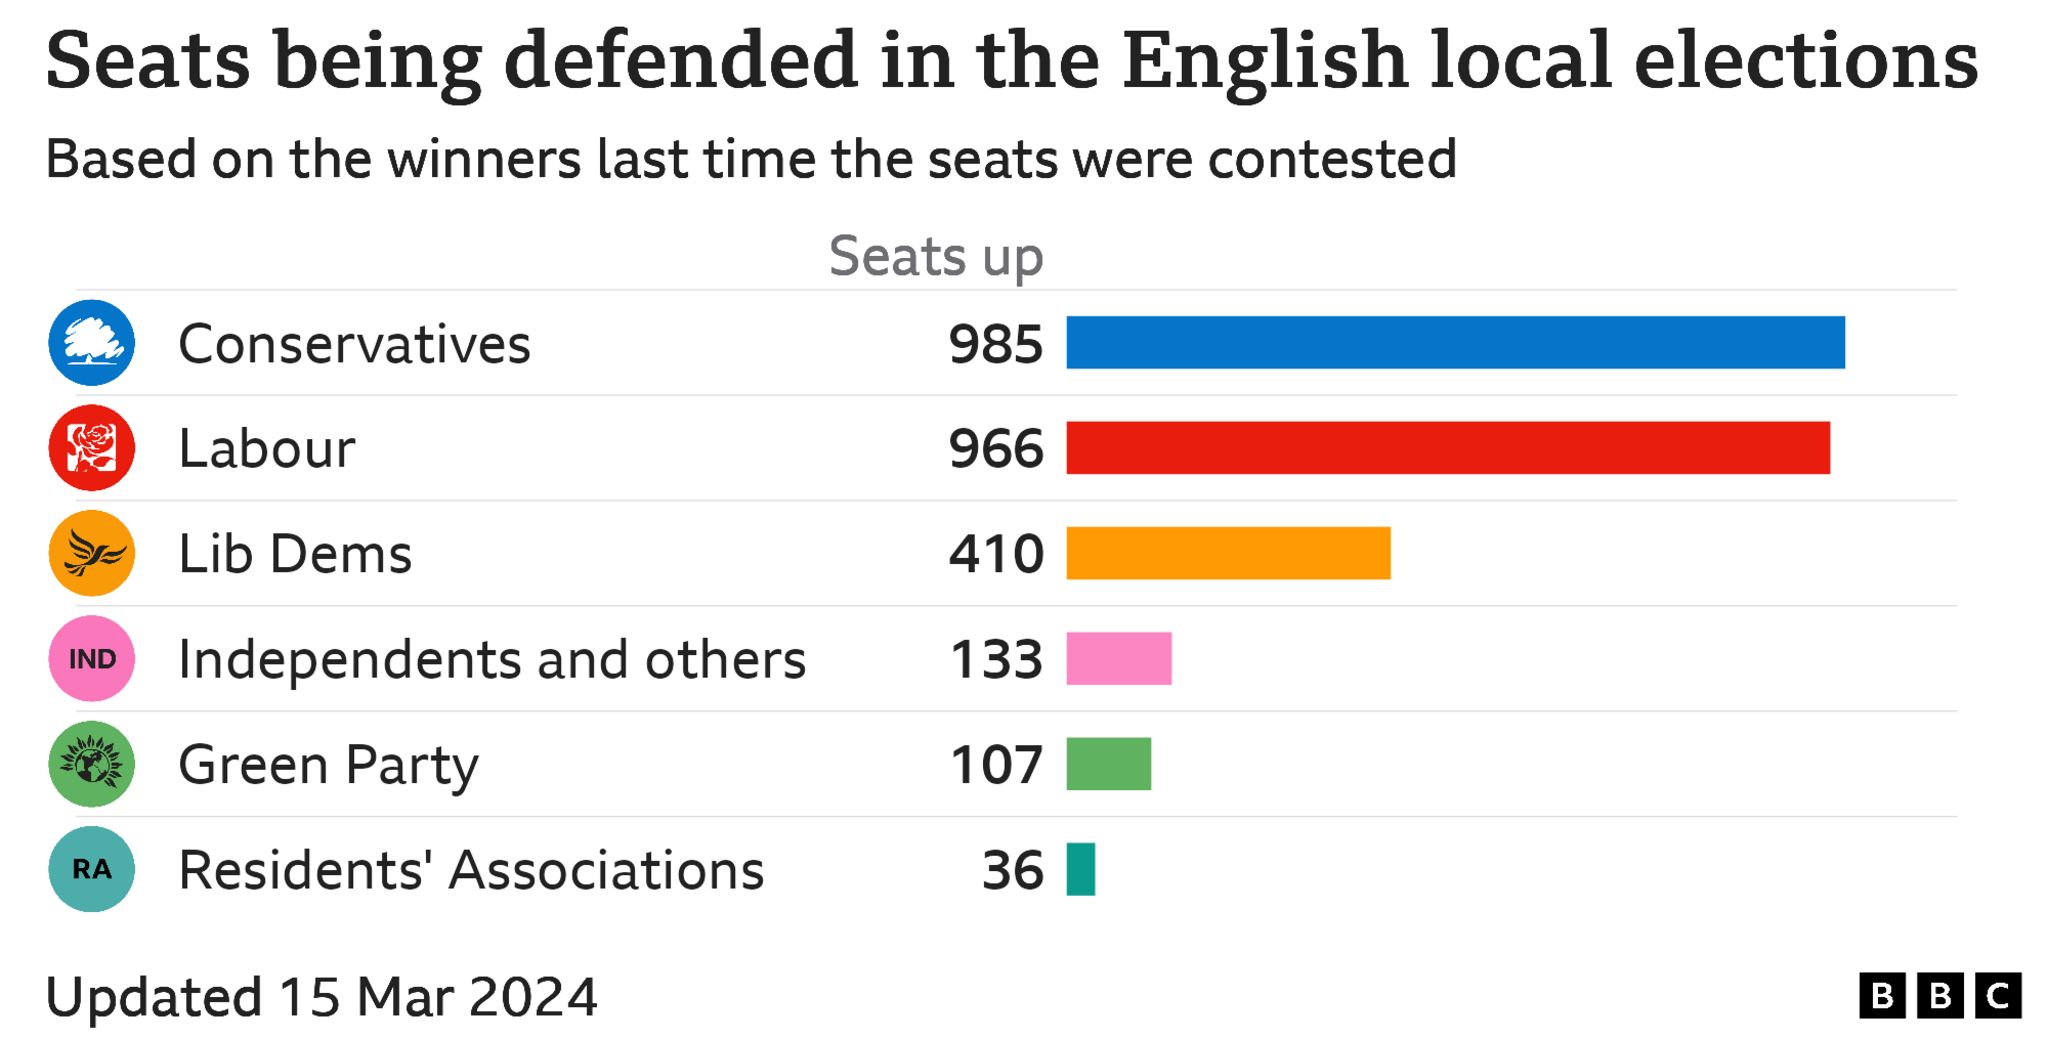 Bar chart showing council seats defended by each party in England - Conservatives 985, Labour 966, Lib Dems 410, Independents and others 133, Green Party 107, Resident's Associations 36